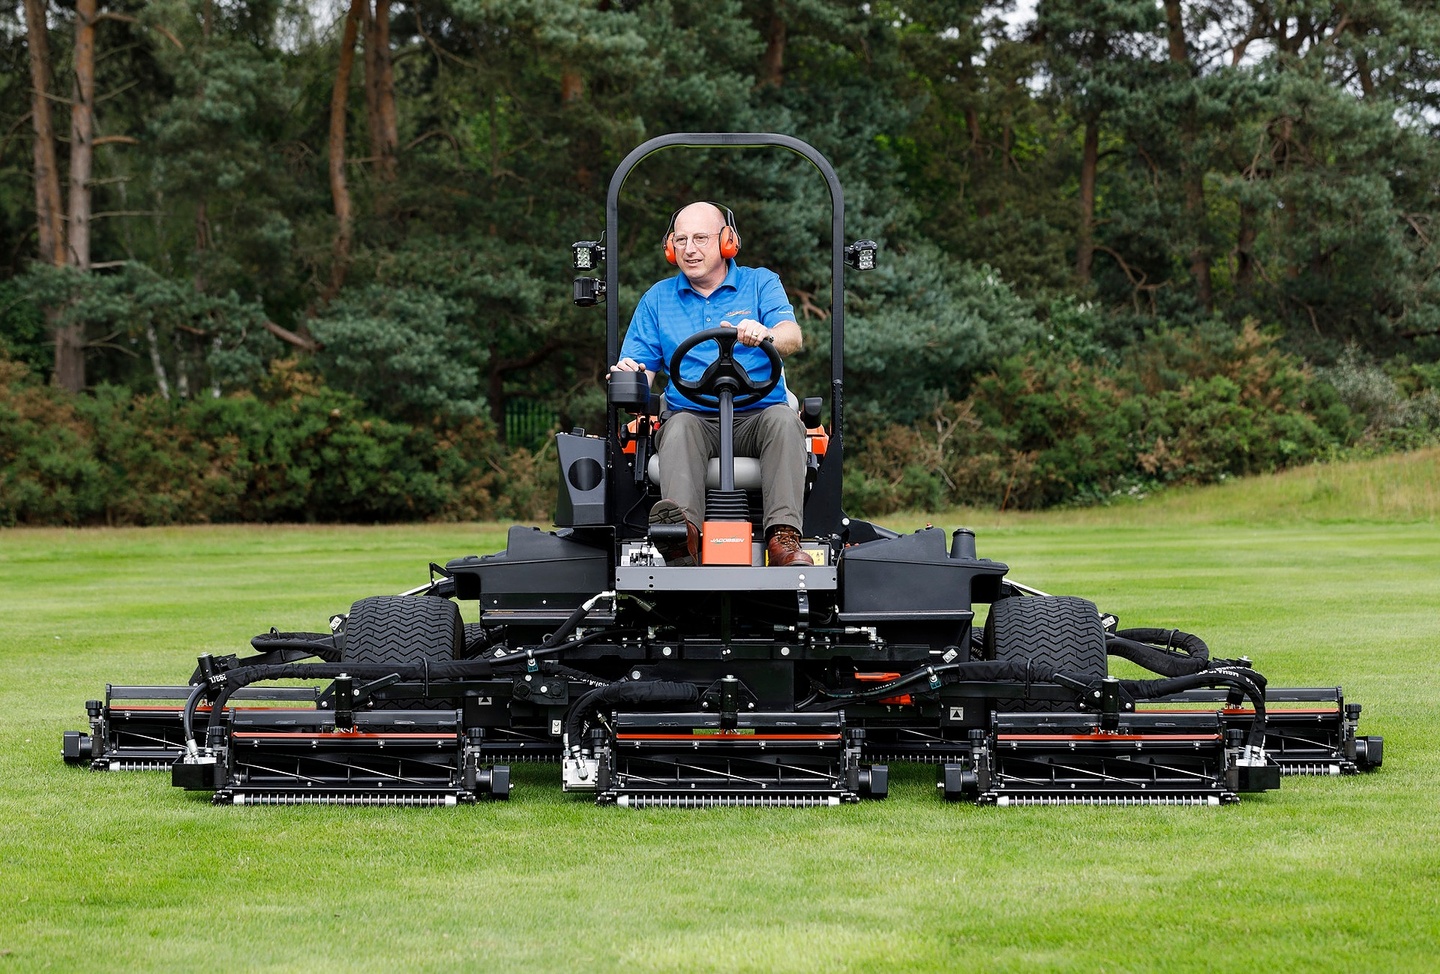 Jacobsen Turf on X: Here it is! Your first look at the majestic F407 large  area reel mower. Find your nearest dealer:   #Jacobsen #Jacobsen100Years #TrustedByGenerations #Mower #F407 #Fairway  #Golf #SincerelyJake